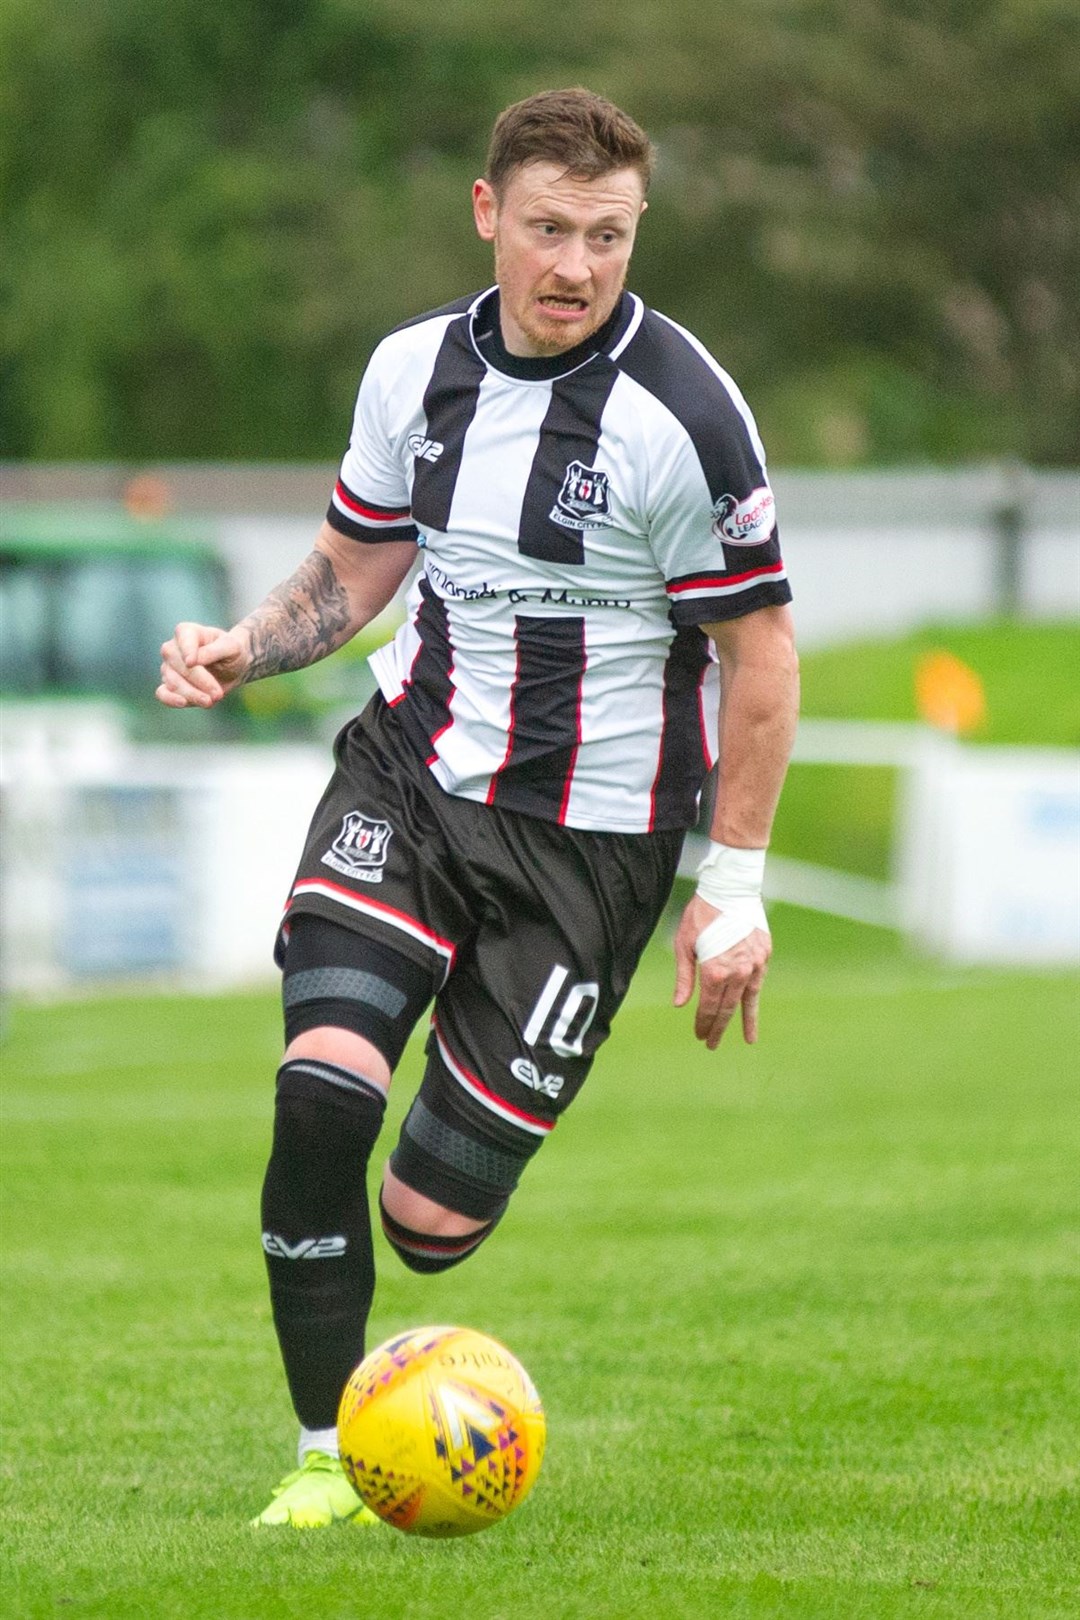 Breaking forward for Elgin City this season, Shane Sutherland is on the brink of a century of goals for the club. Photo: Daniel Forsyth